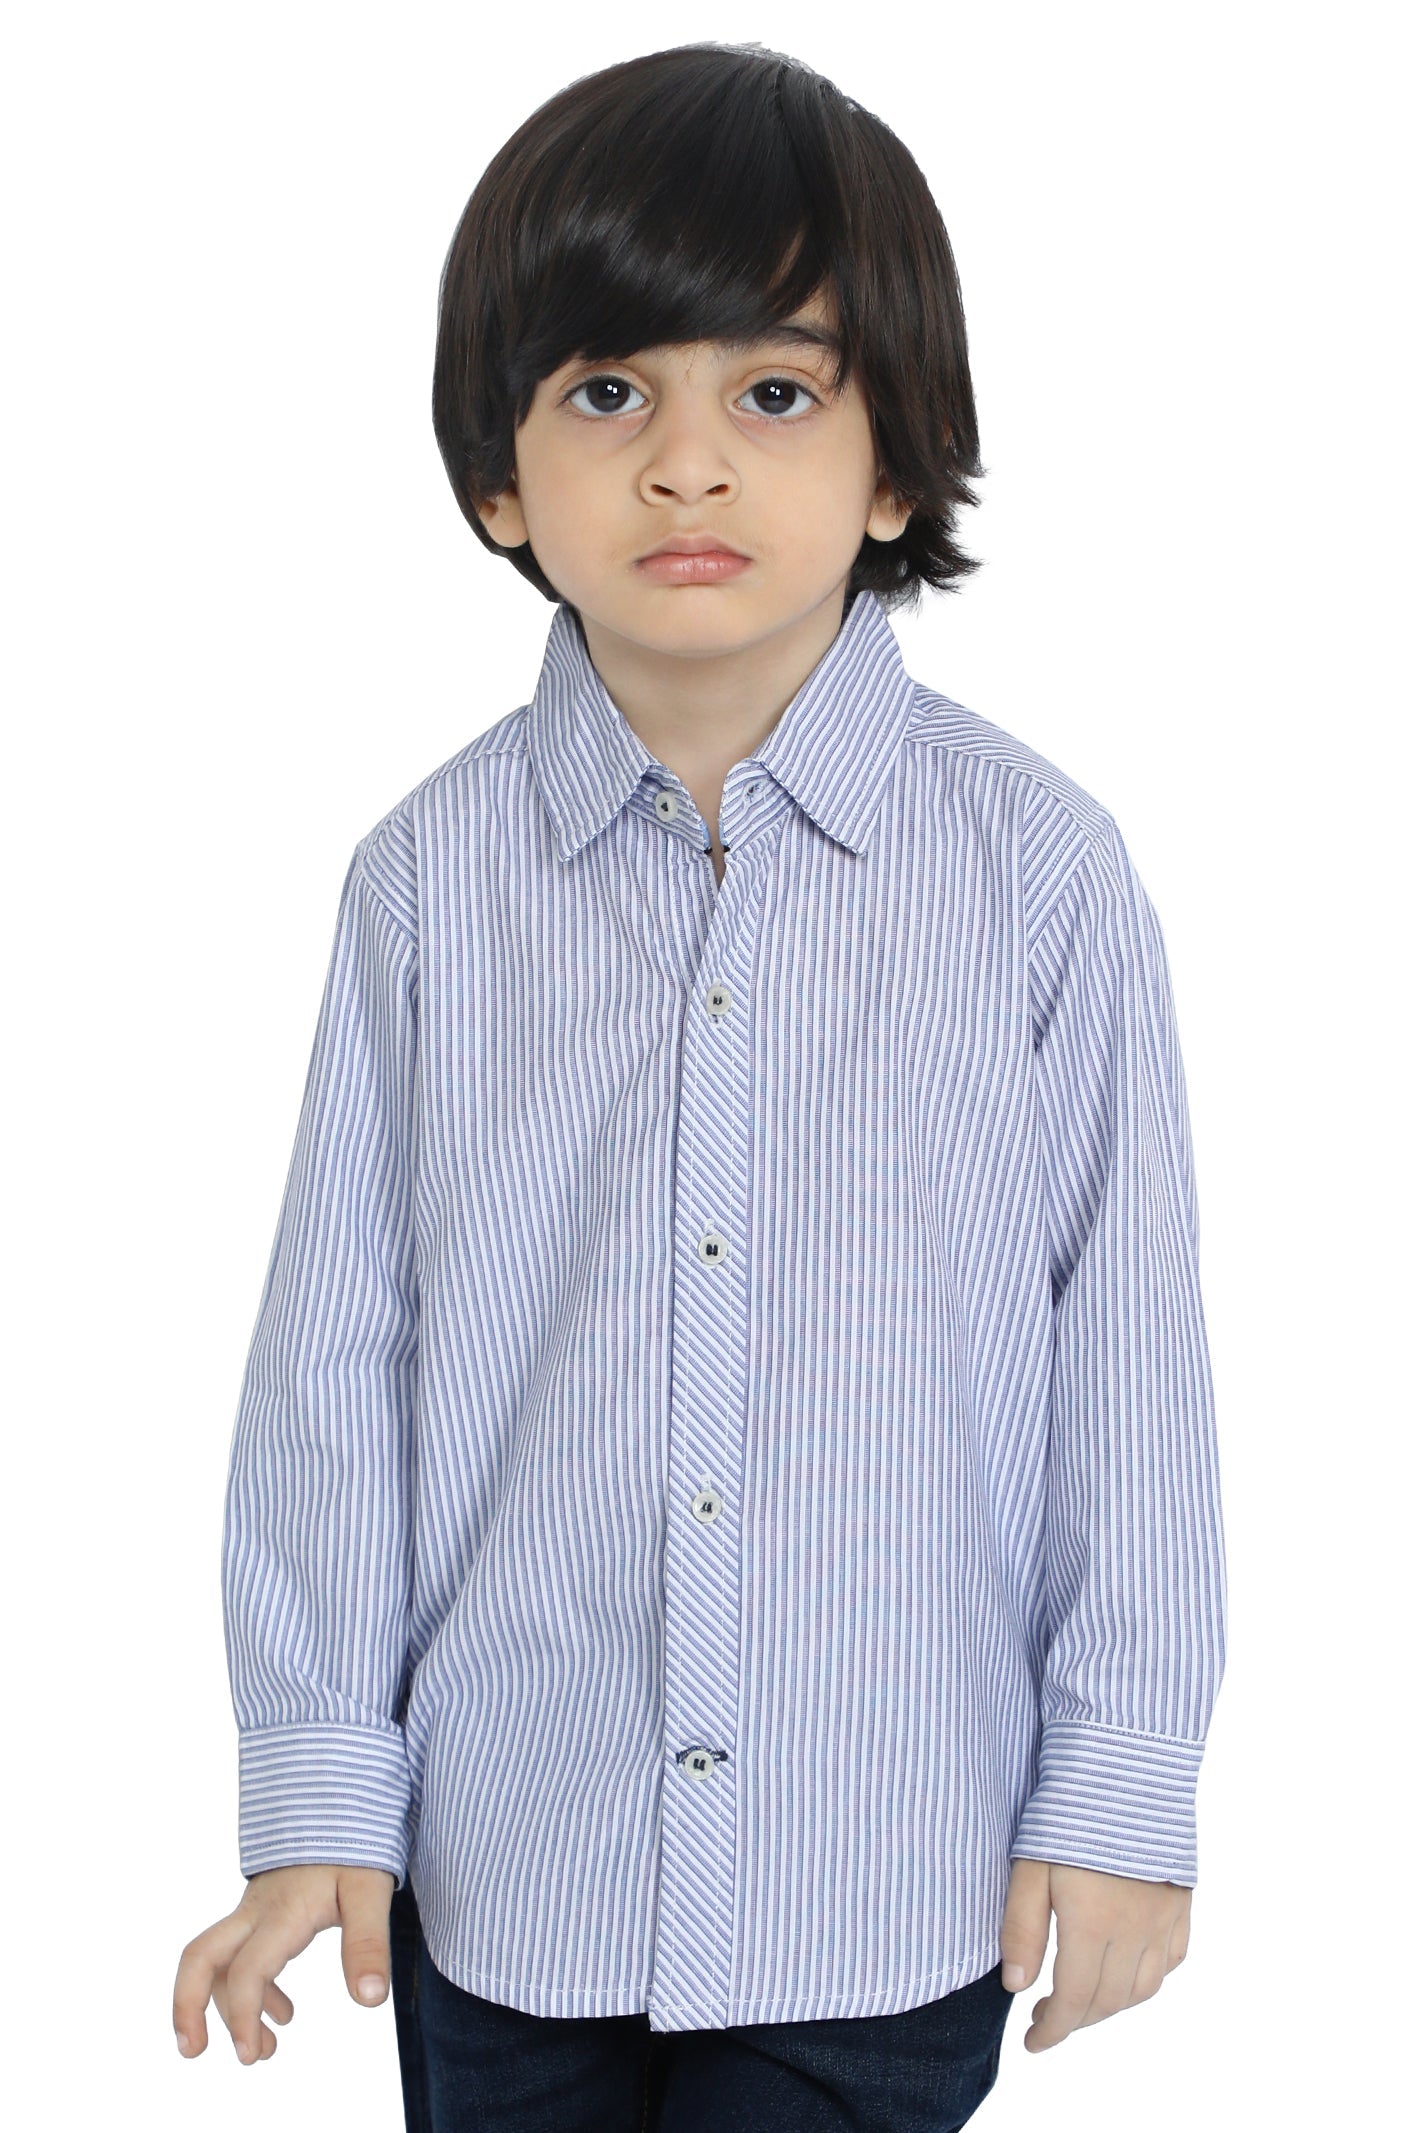 Boys Toddler Casual Shirt In Blue SKU: IBB-0023-BLUE - Diners